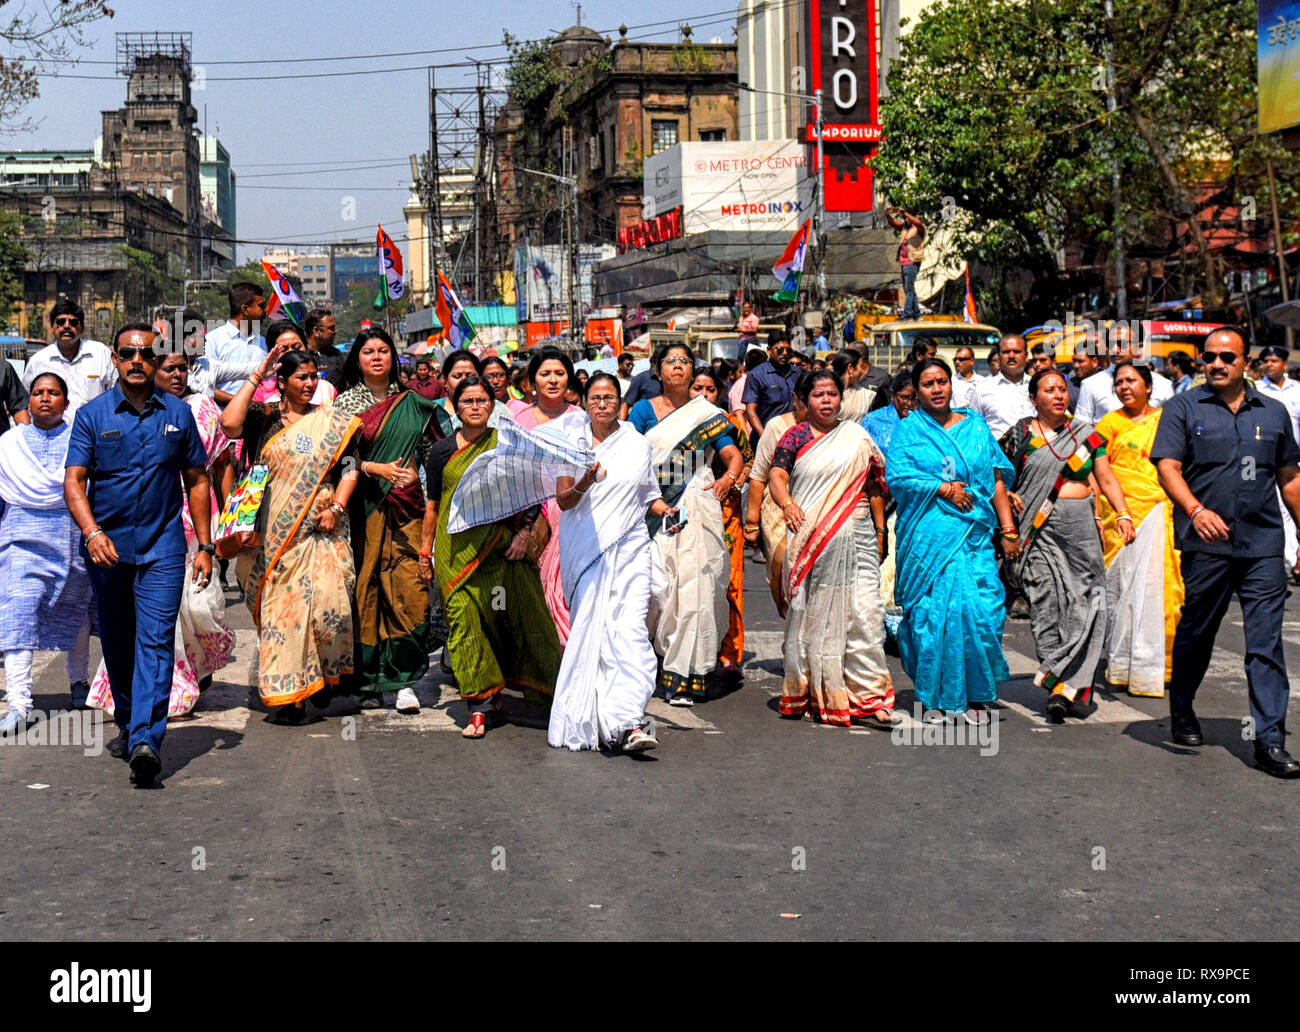 Chief Minister of West Bengal (Middle White Saree) Mamata Banerjee seen leading the rally during the International Women's Day in Kolkata. Stock Photo